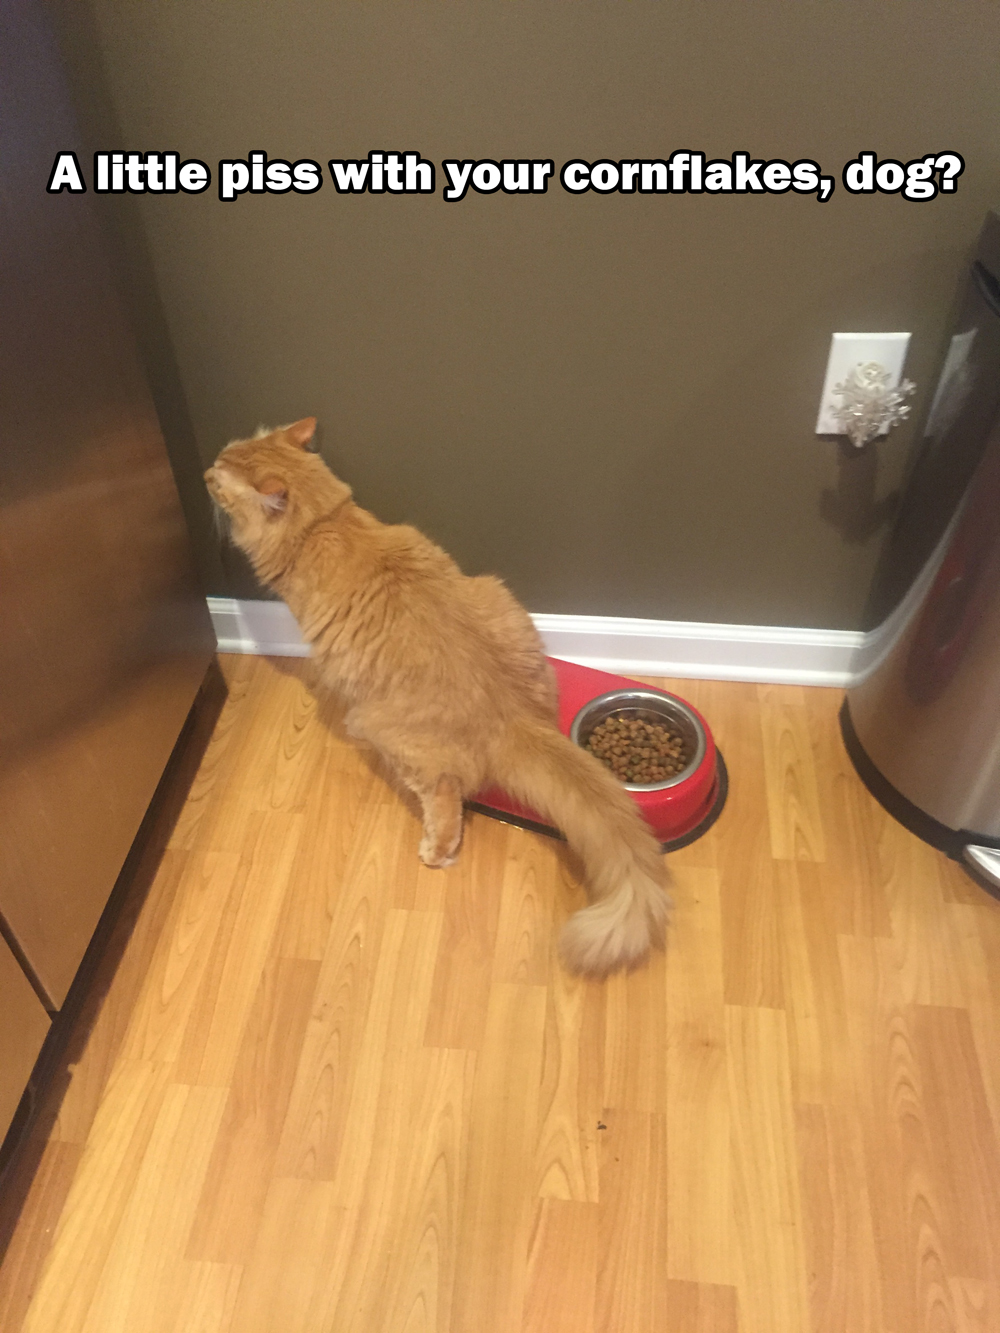 Cat - A little piss with your cornflakes, dog?